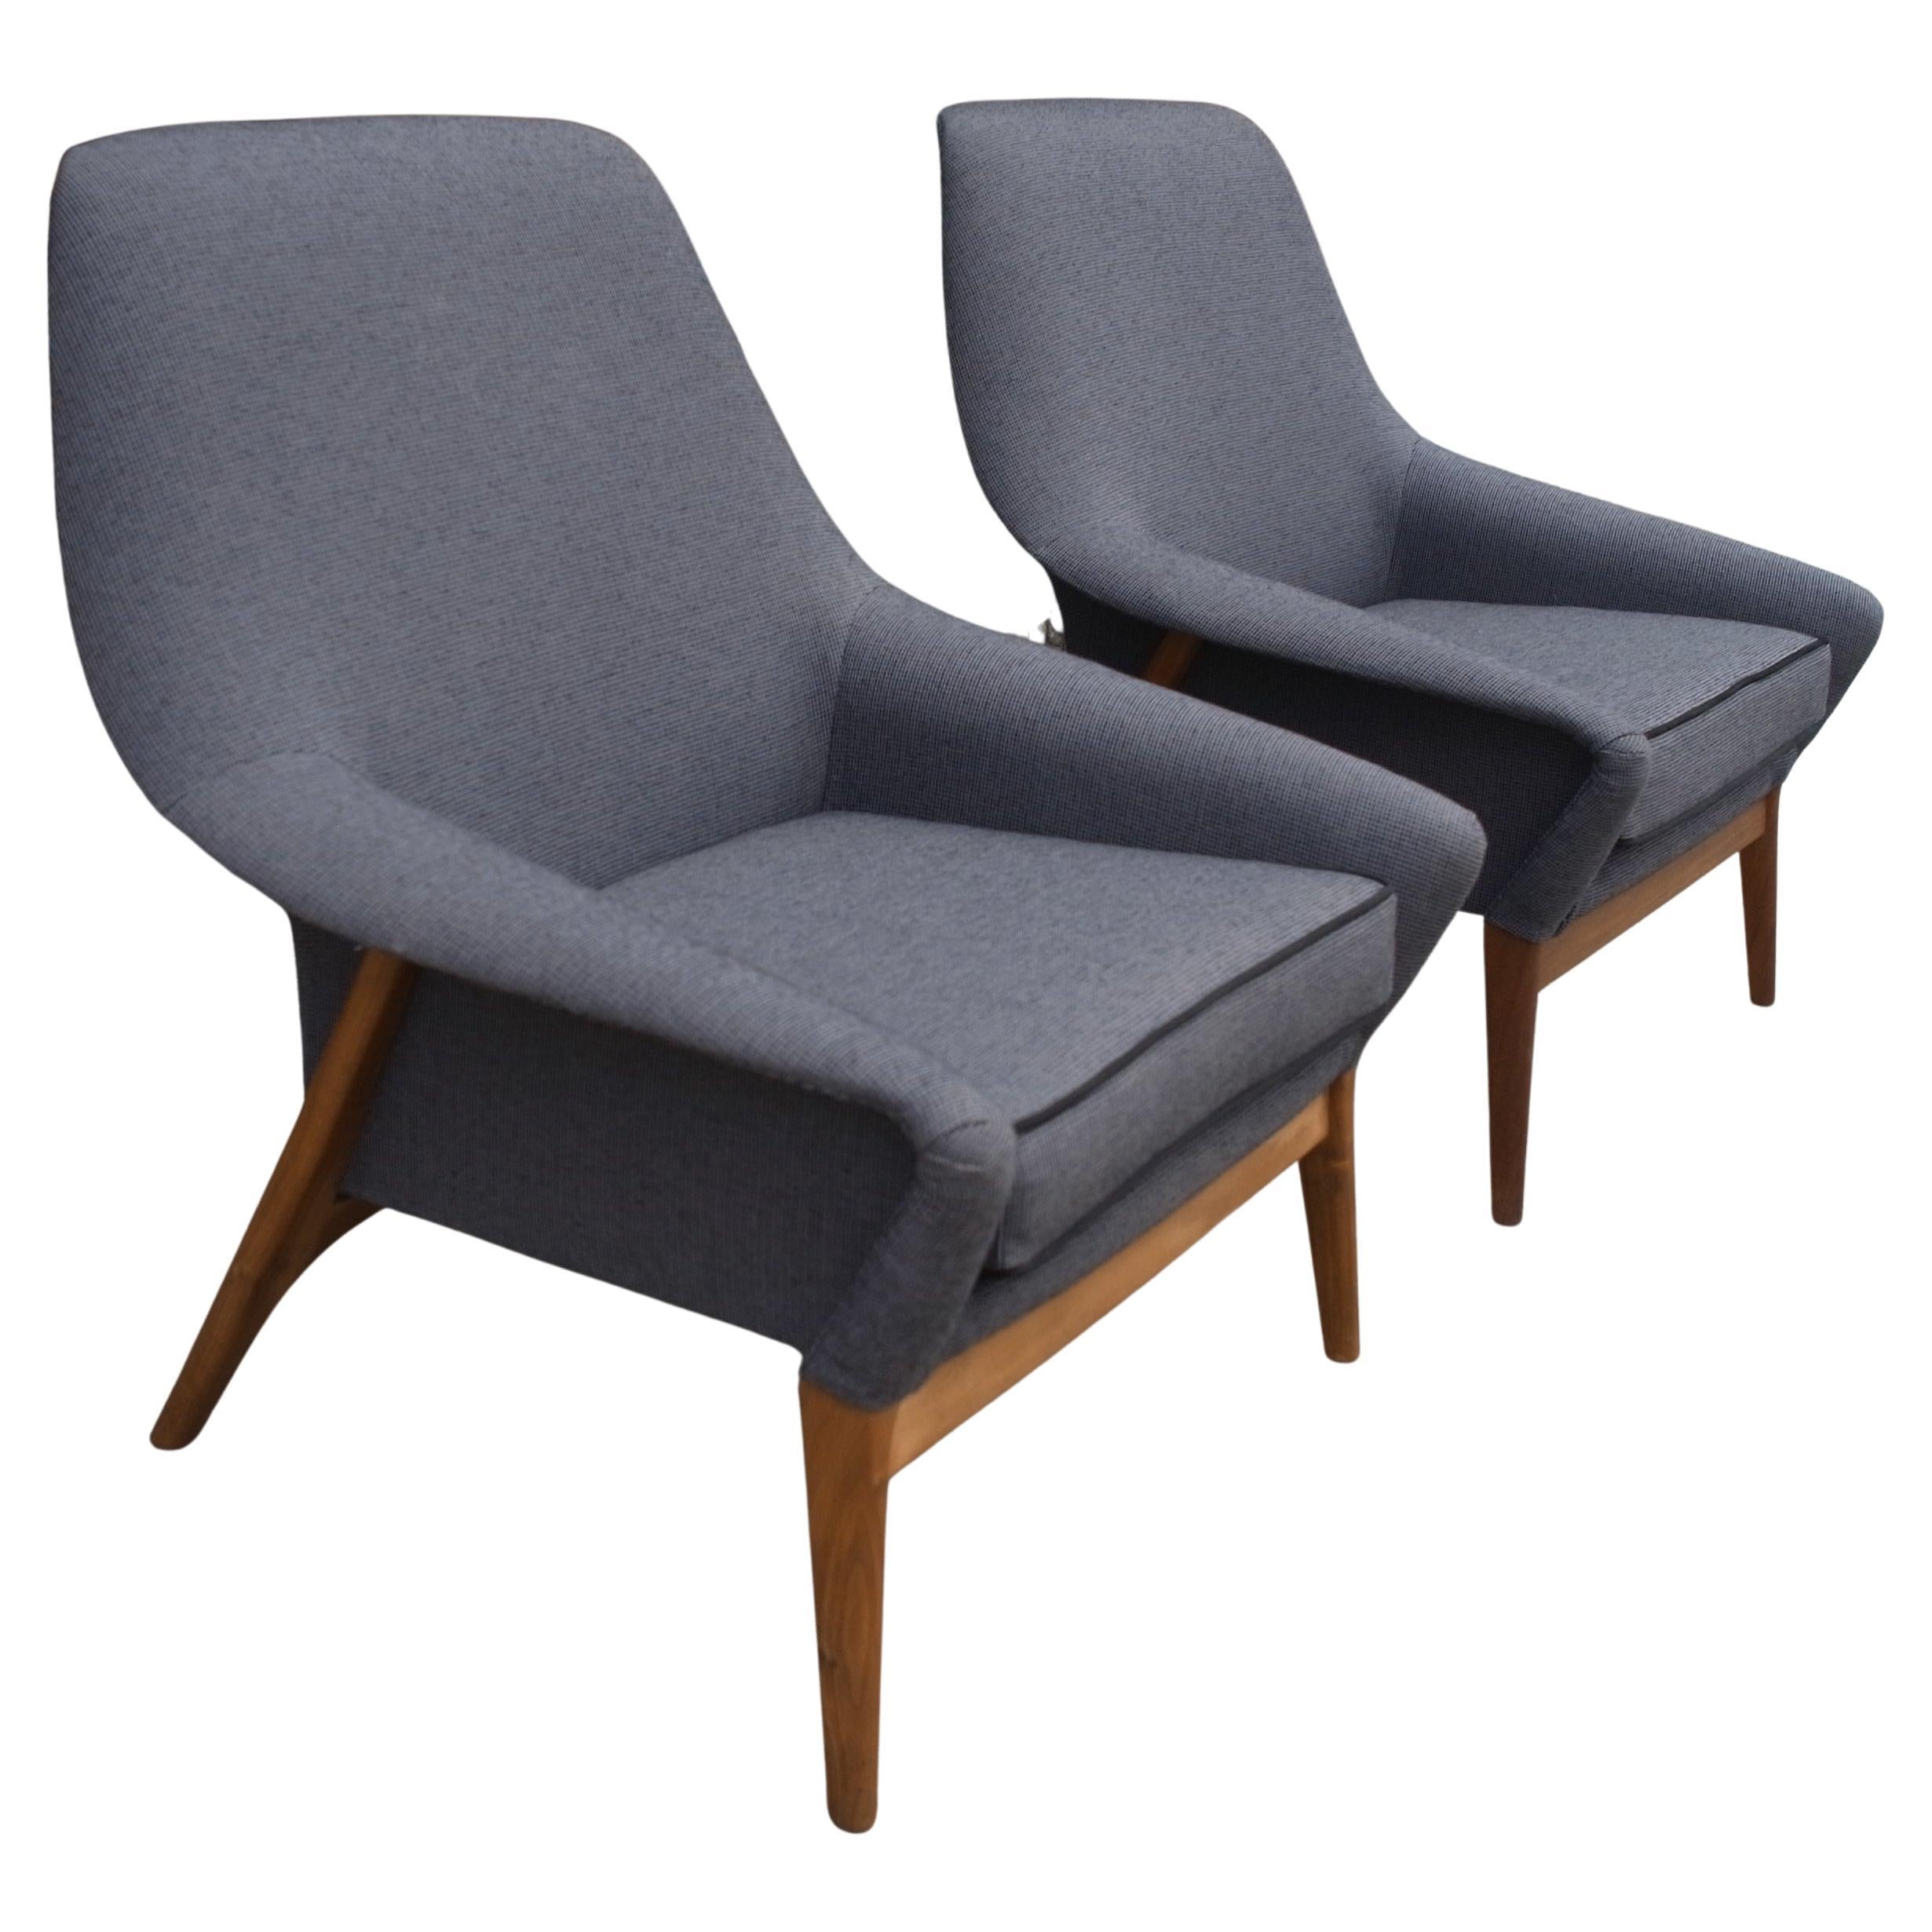 Pair of 1950s British Manufactured Parker Knoll Armchairs For Sale